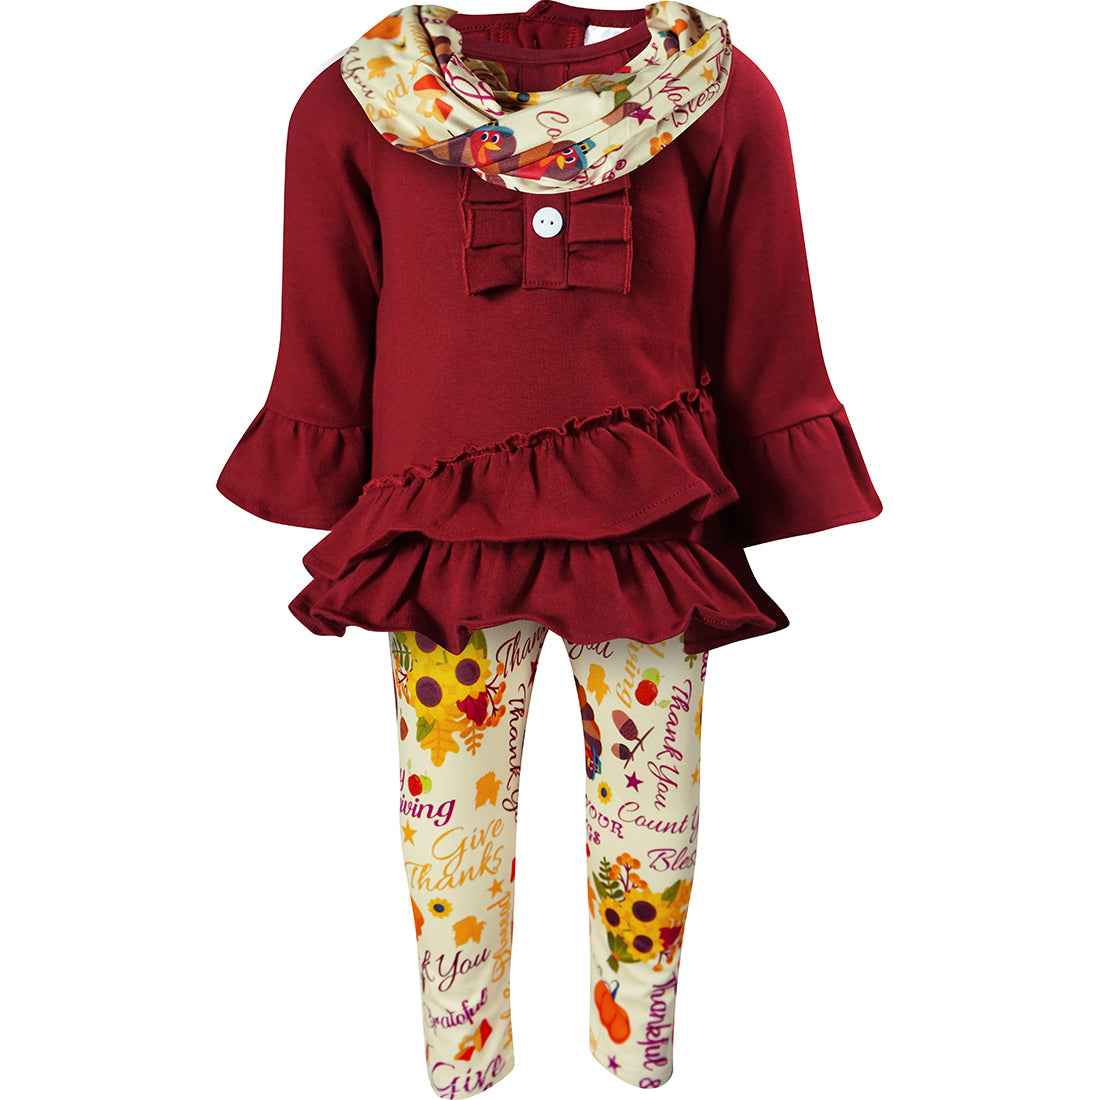 Baby Toddler Little Girls Thanksgiving Turkey Be Grateful Thankful Blessed Boutique Outfit Set With Scarf - Burgundy - Angeline Kids